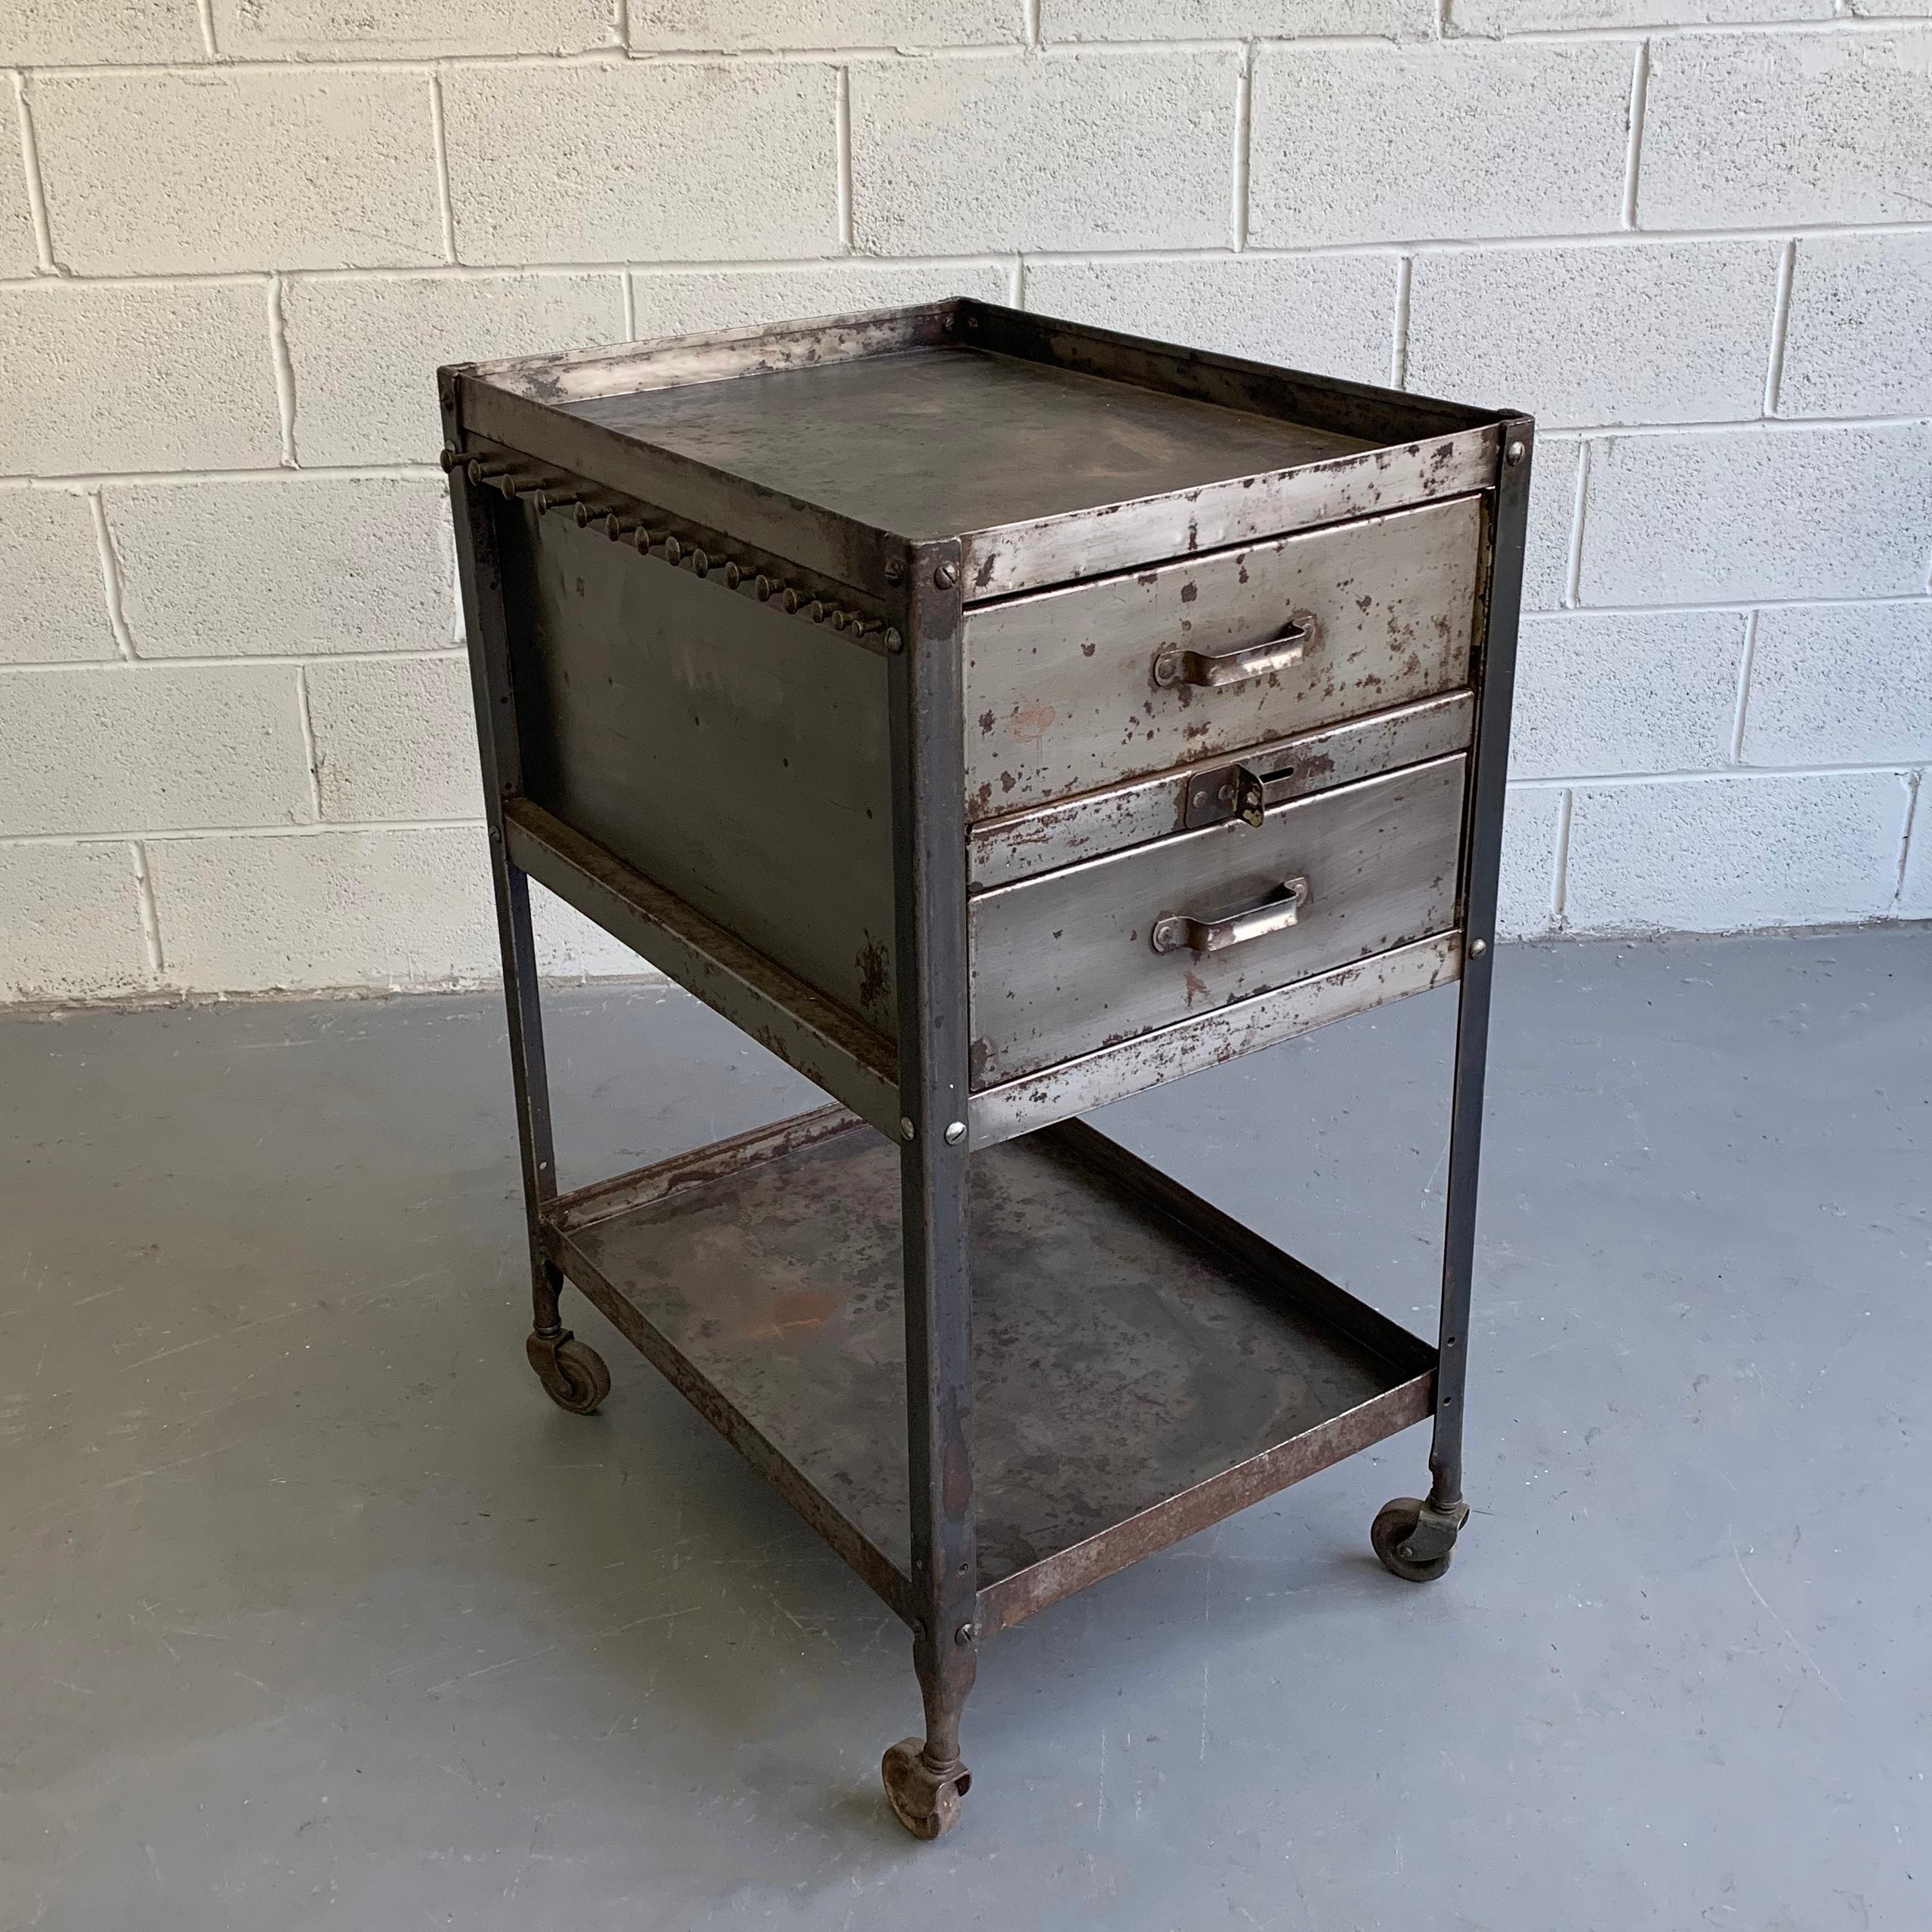 Midcentury, industrial, brushed steel, rolling, tool caddy by Lyon features drawers on top and open storage below with pegs on one side for hanging. The caddy can be repurposed in many ways and can make a great kitchen piece. Interior of drawers is